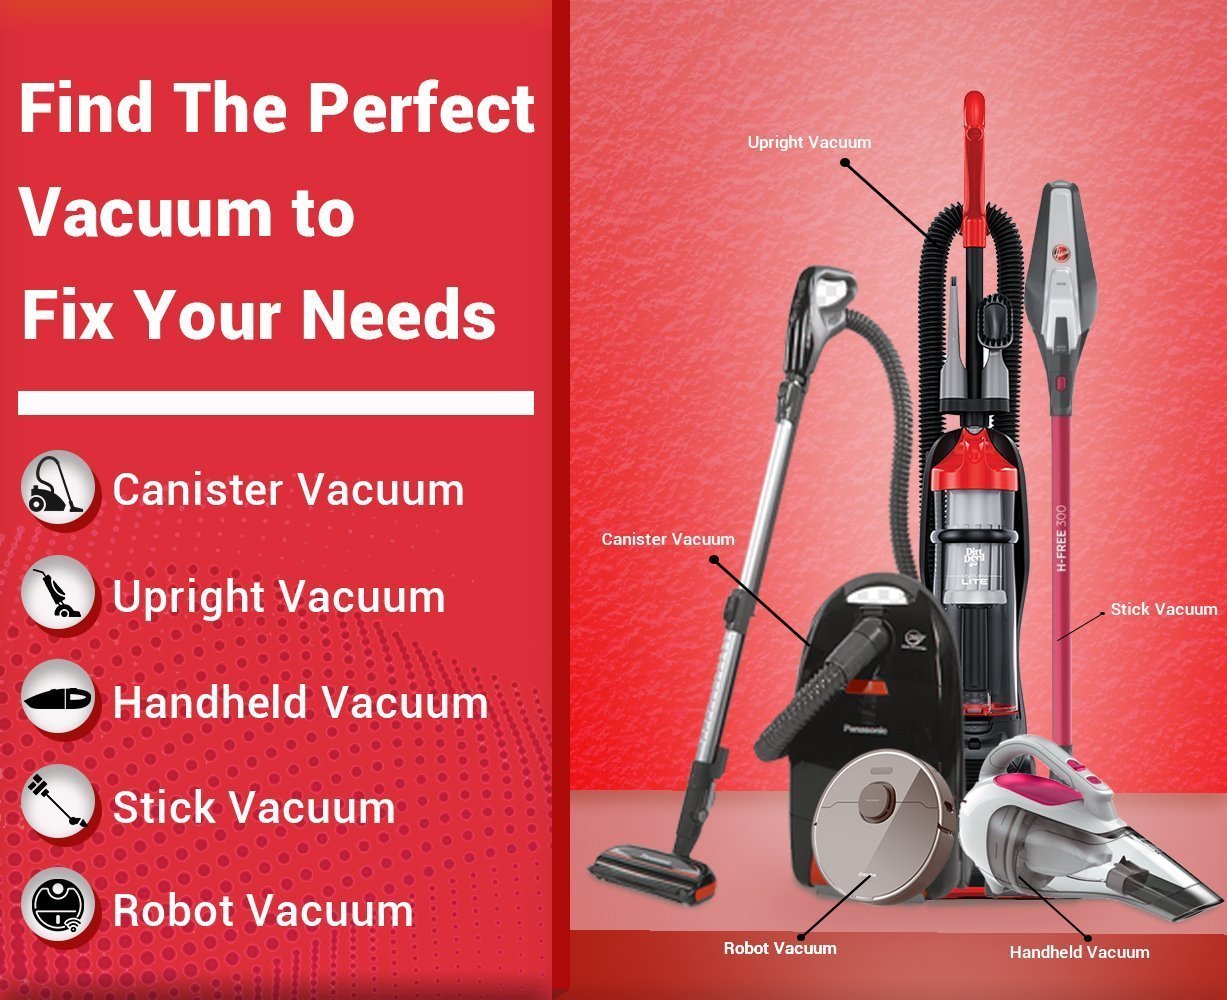 Find the Perfect Vacuum to Fix Your Needs